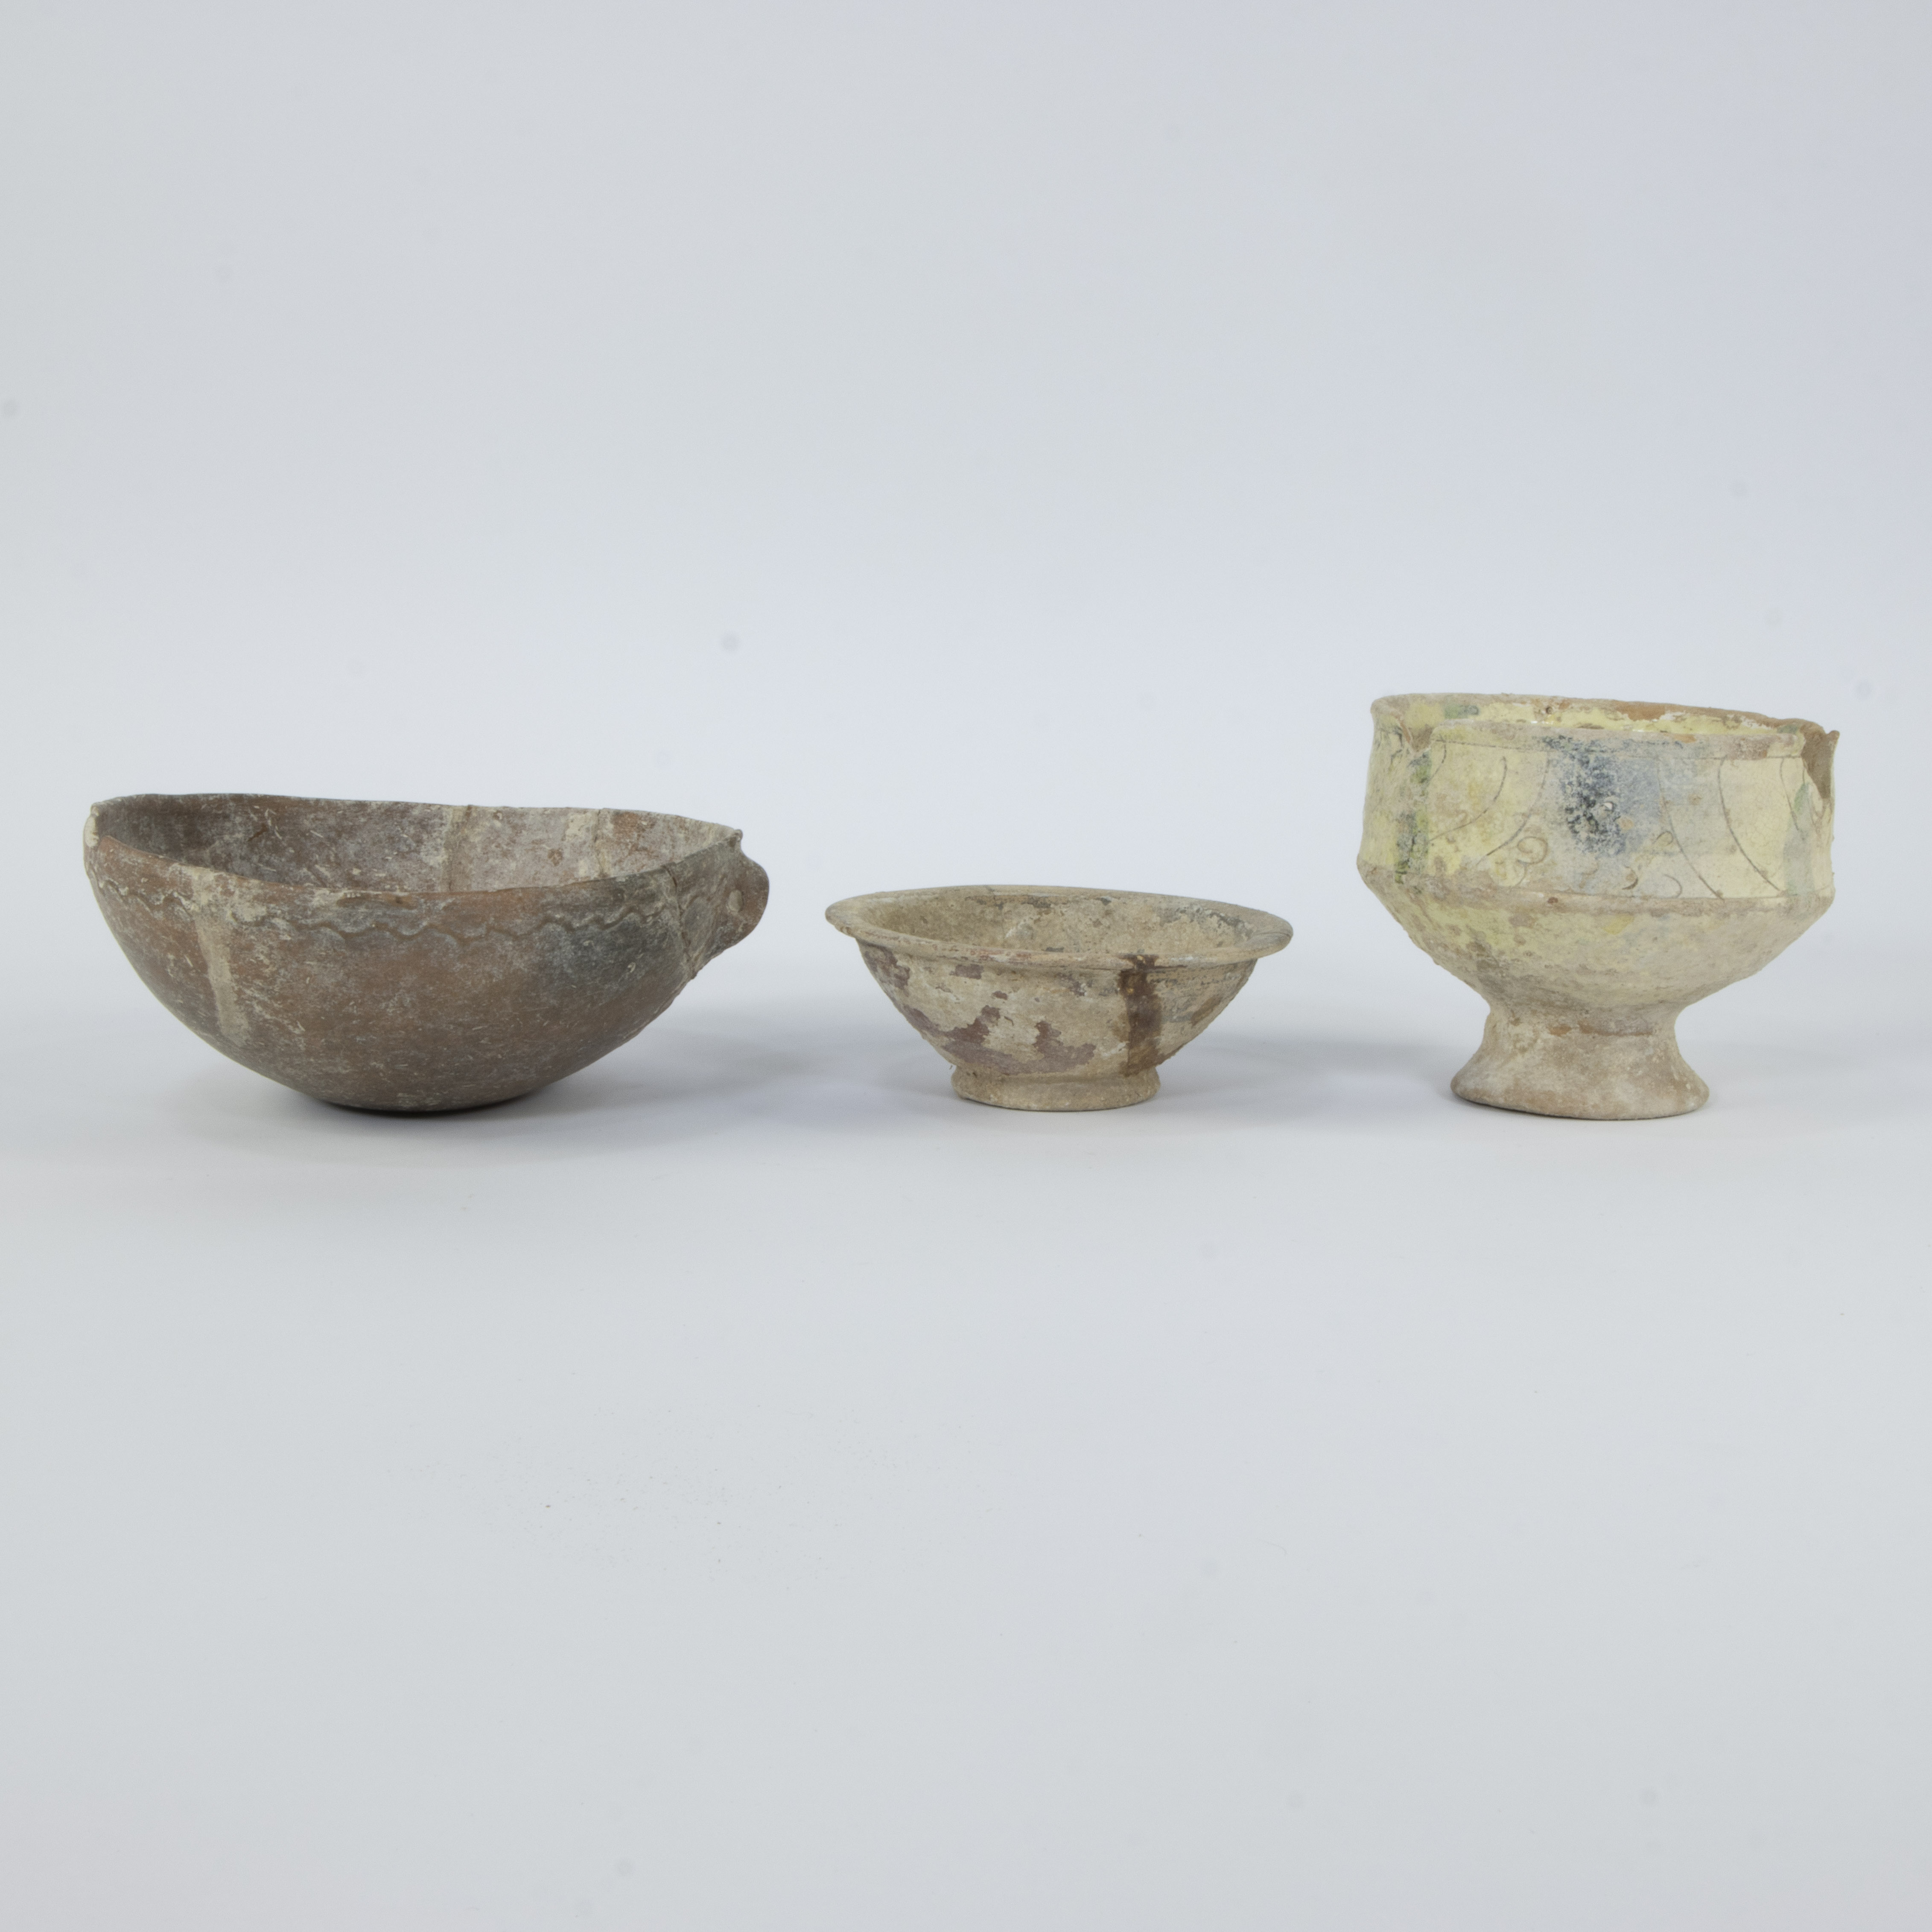 Pottery from ancient Greece, 2 bowls and a drinking cup - Image 3 of 5